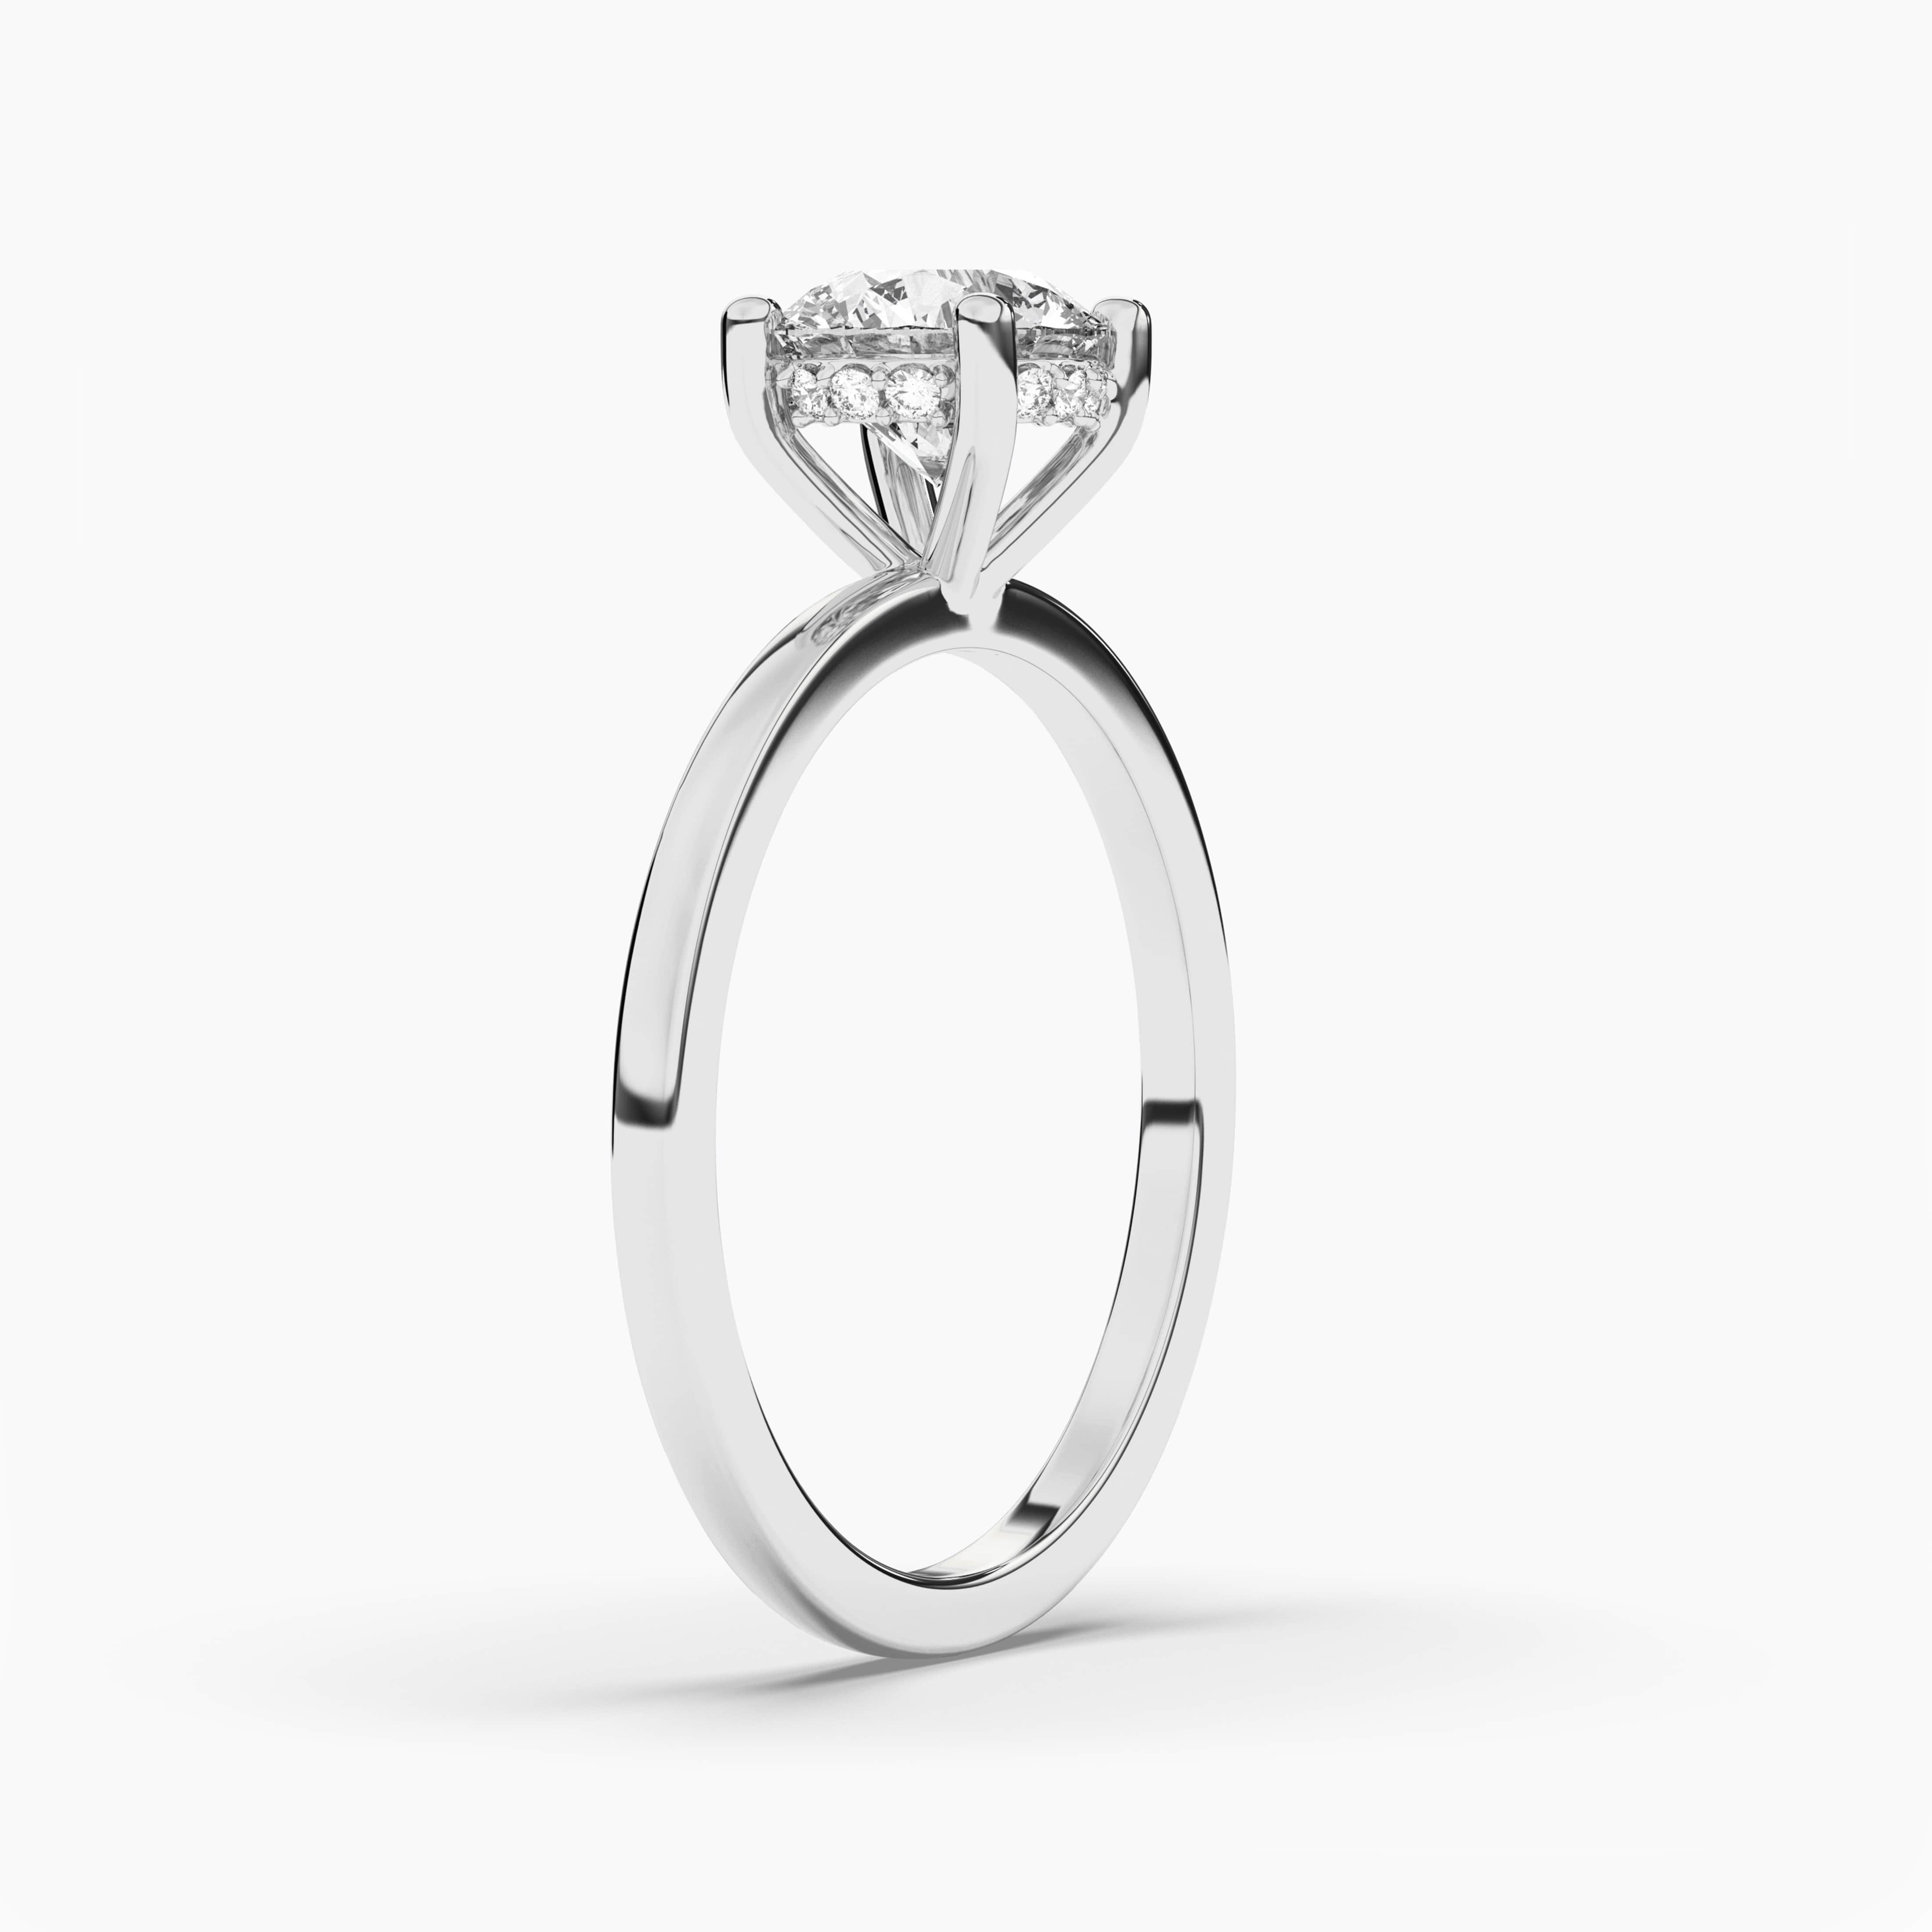 Hidden Halo round halo engagement rings